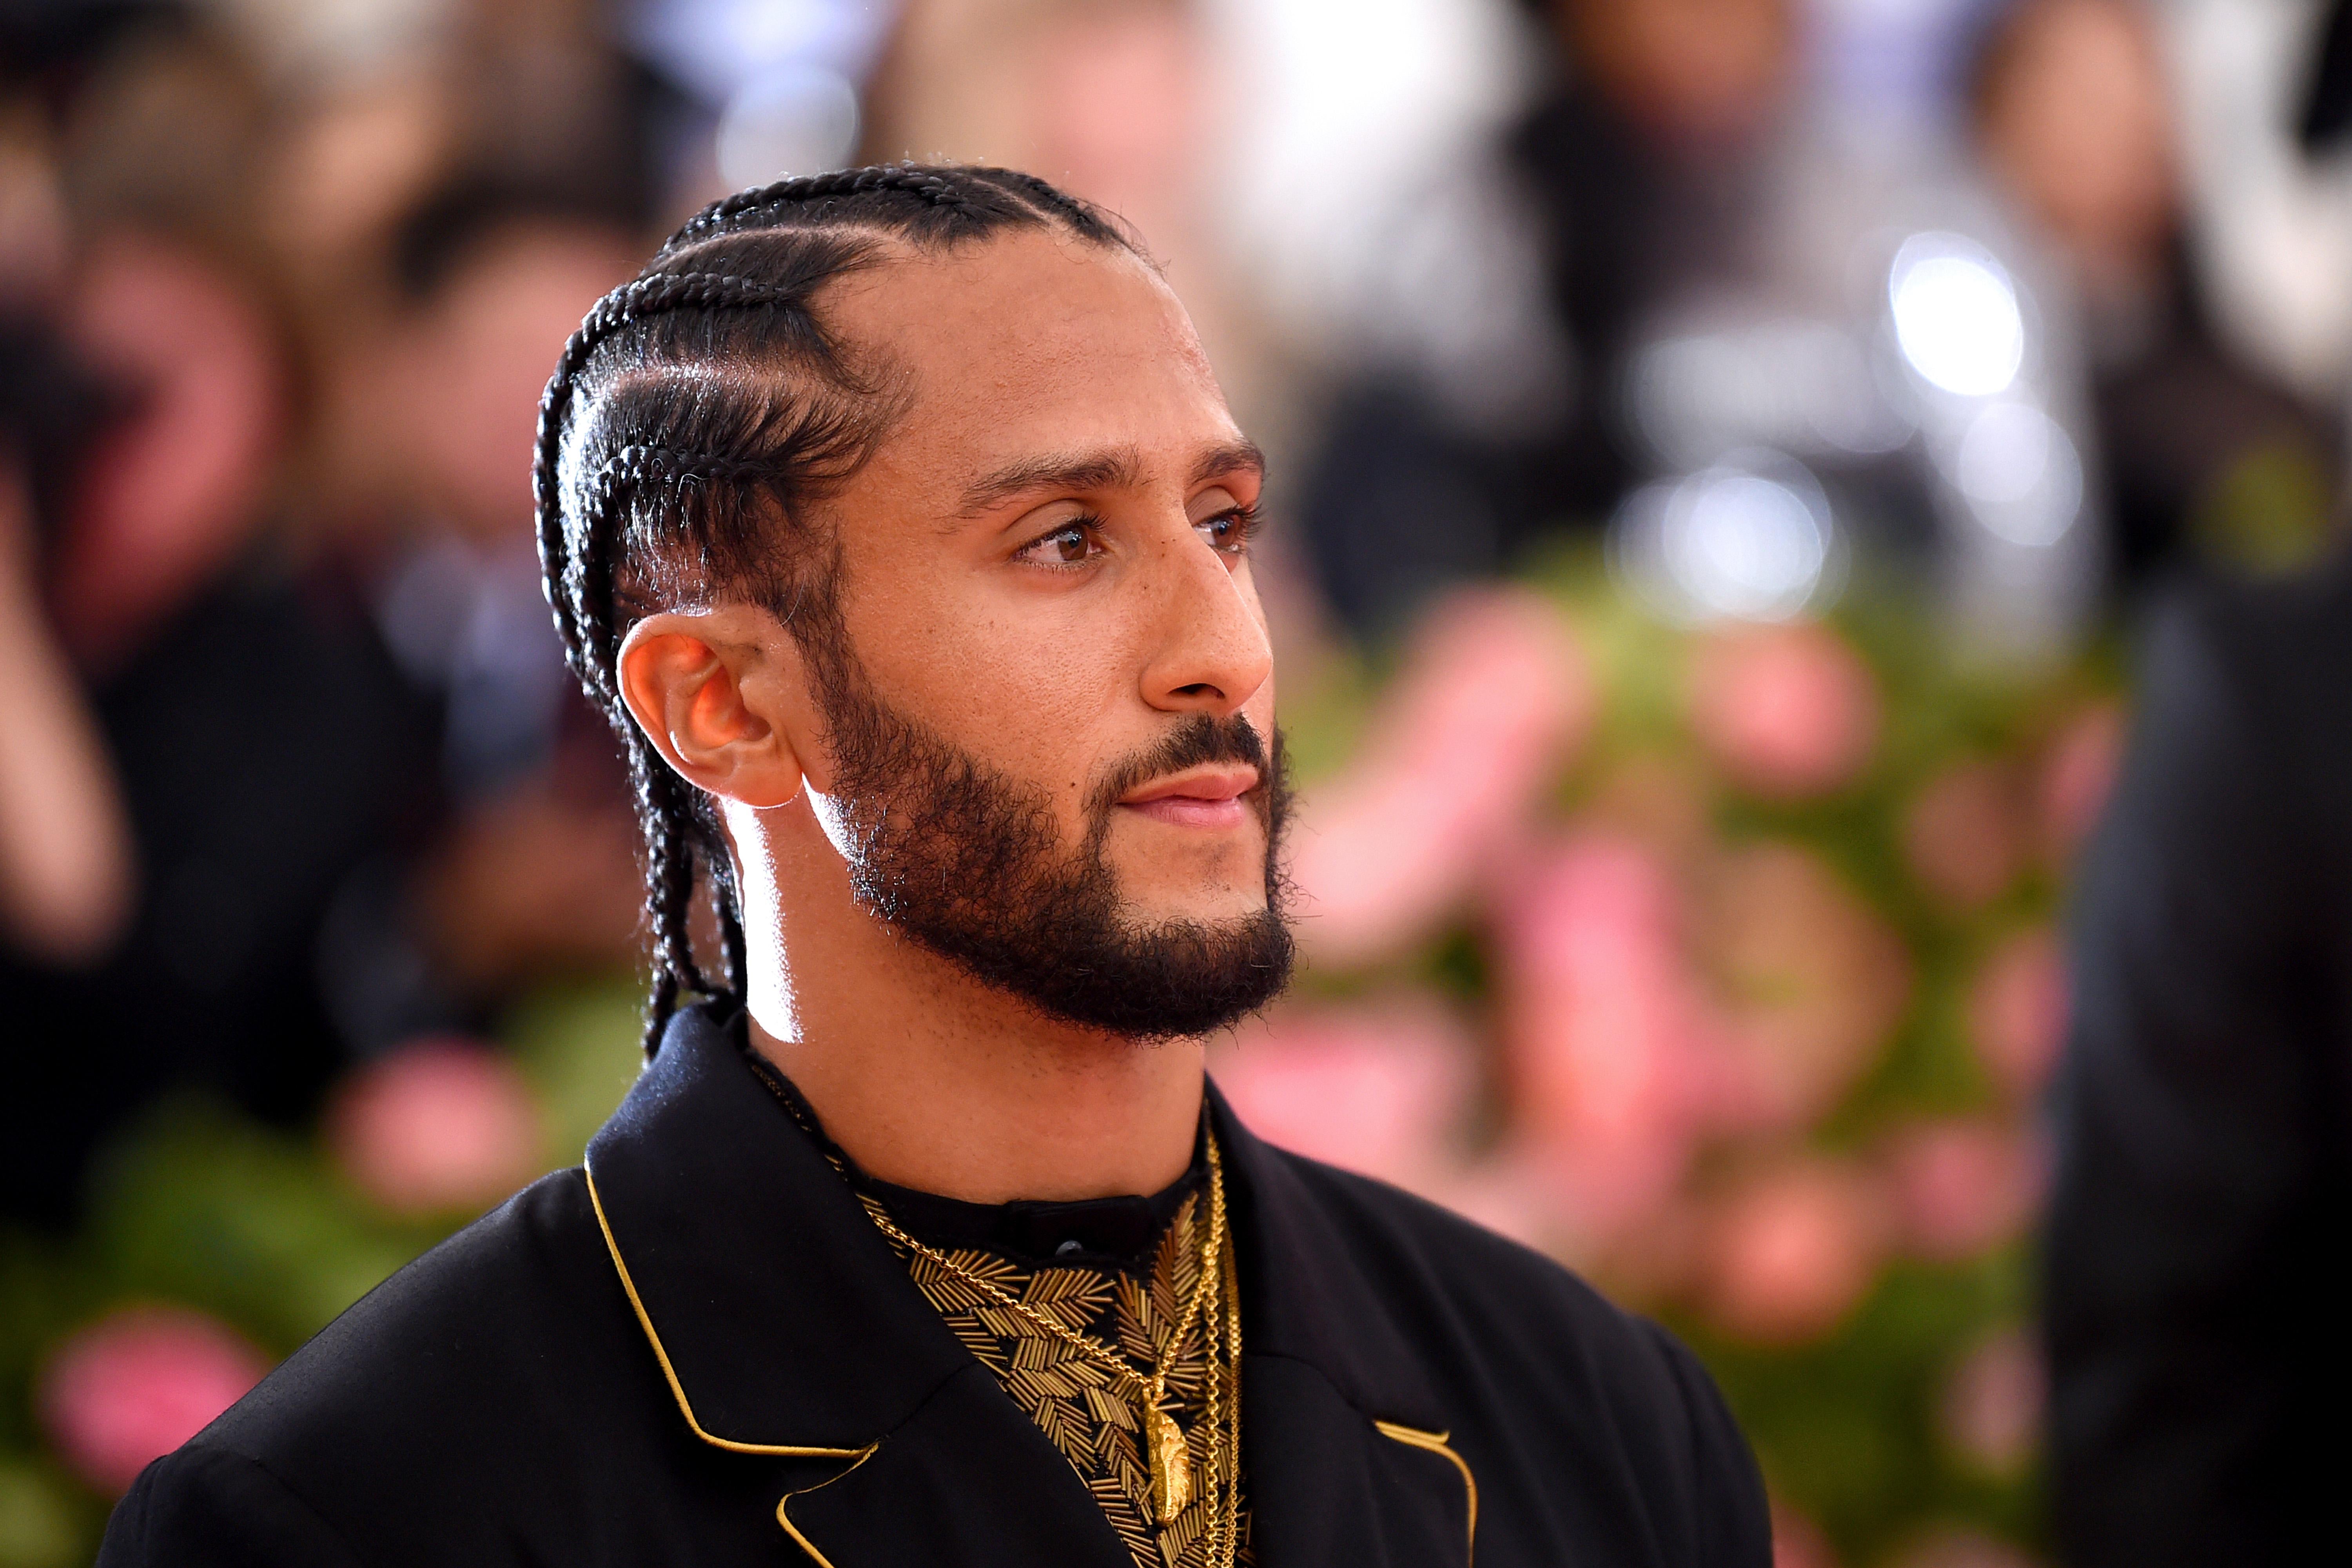 Colin Kaepernick as seen at the 2019 Met Gala on May 6 in New York City. He has cool braids.